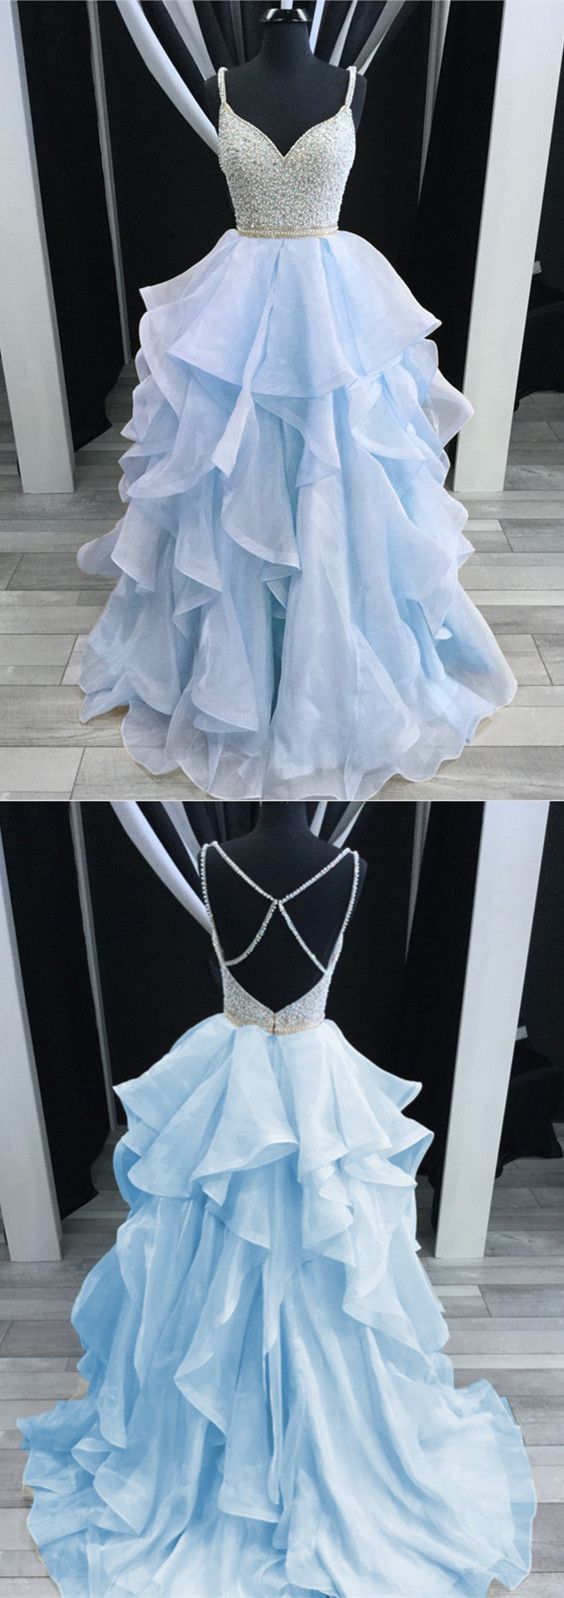 Baby Blue Prom Dresses Ballgowns Organza Ruffles V-neck With Beaded And Cross Back P1896